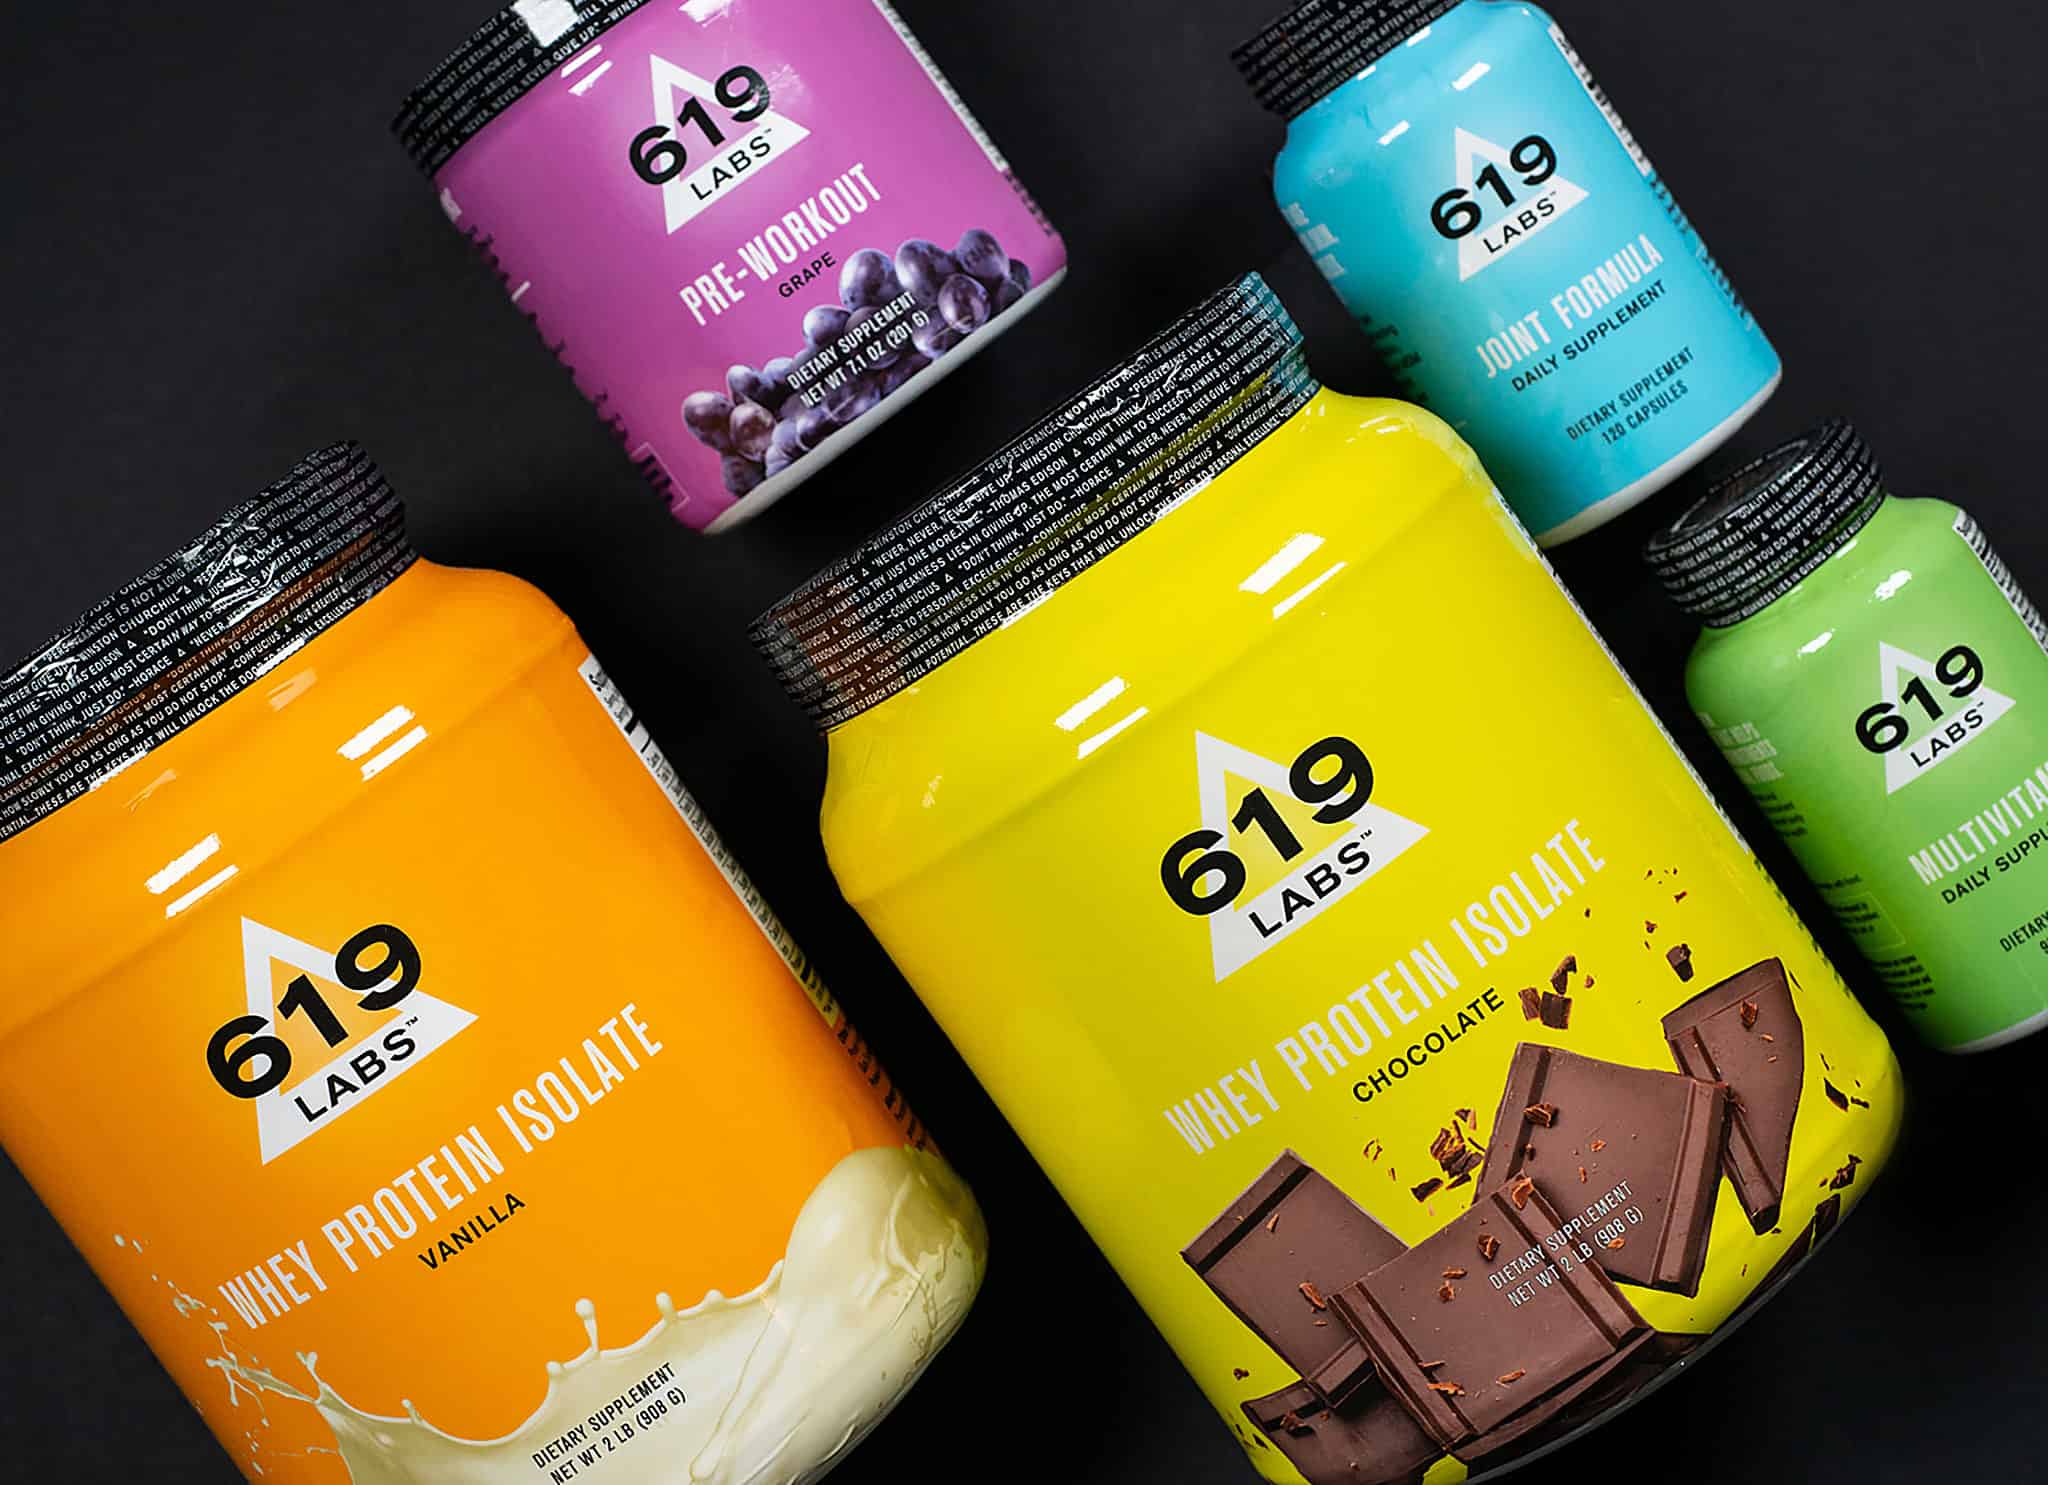 Custom packaging, graphic design, and branding for 619 Labs fitness and nutritional supplements, full product line | Designed by Field of Study: A branding and graphic design consultancy | Houston TX | Jennifer Blanco & John Earles